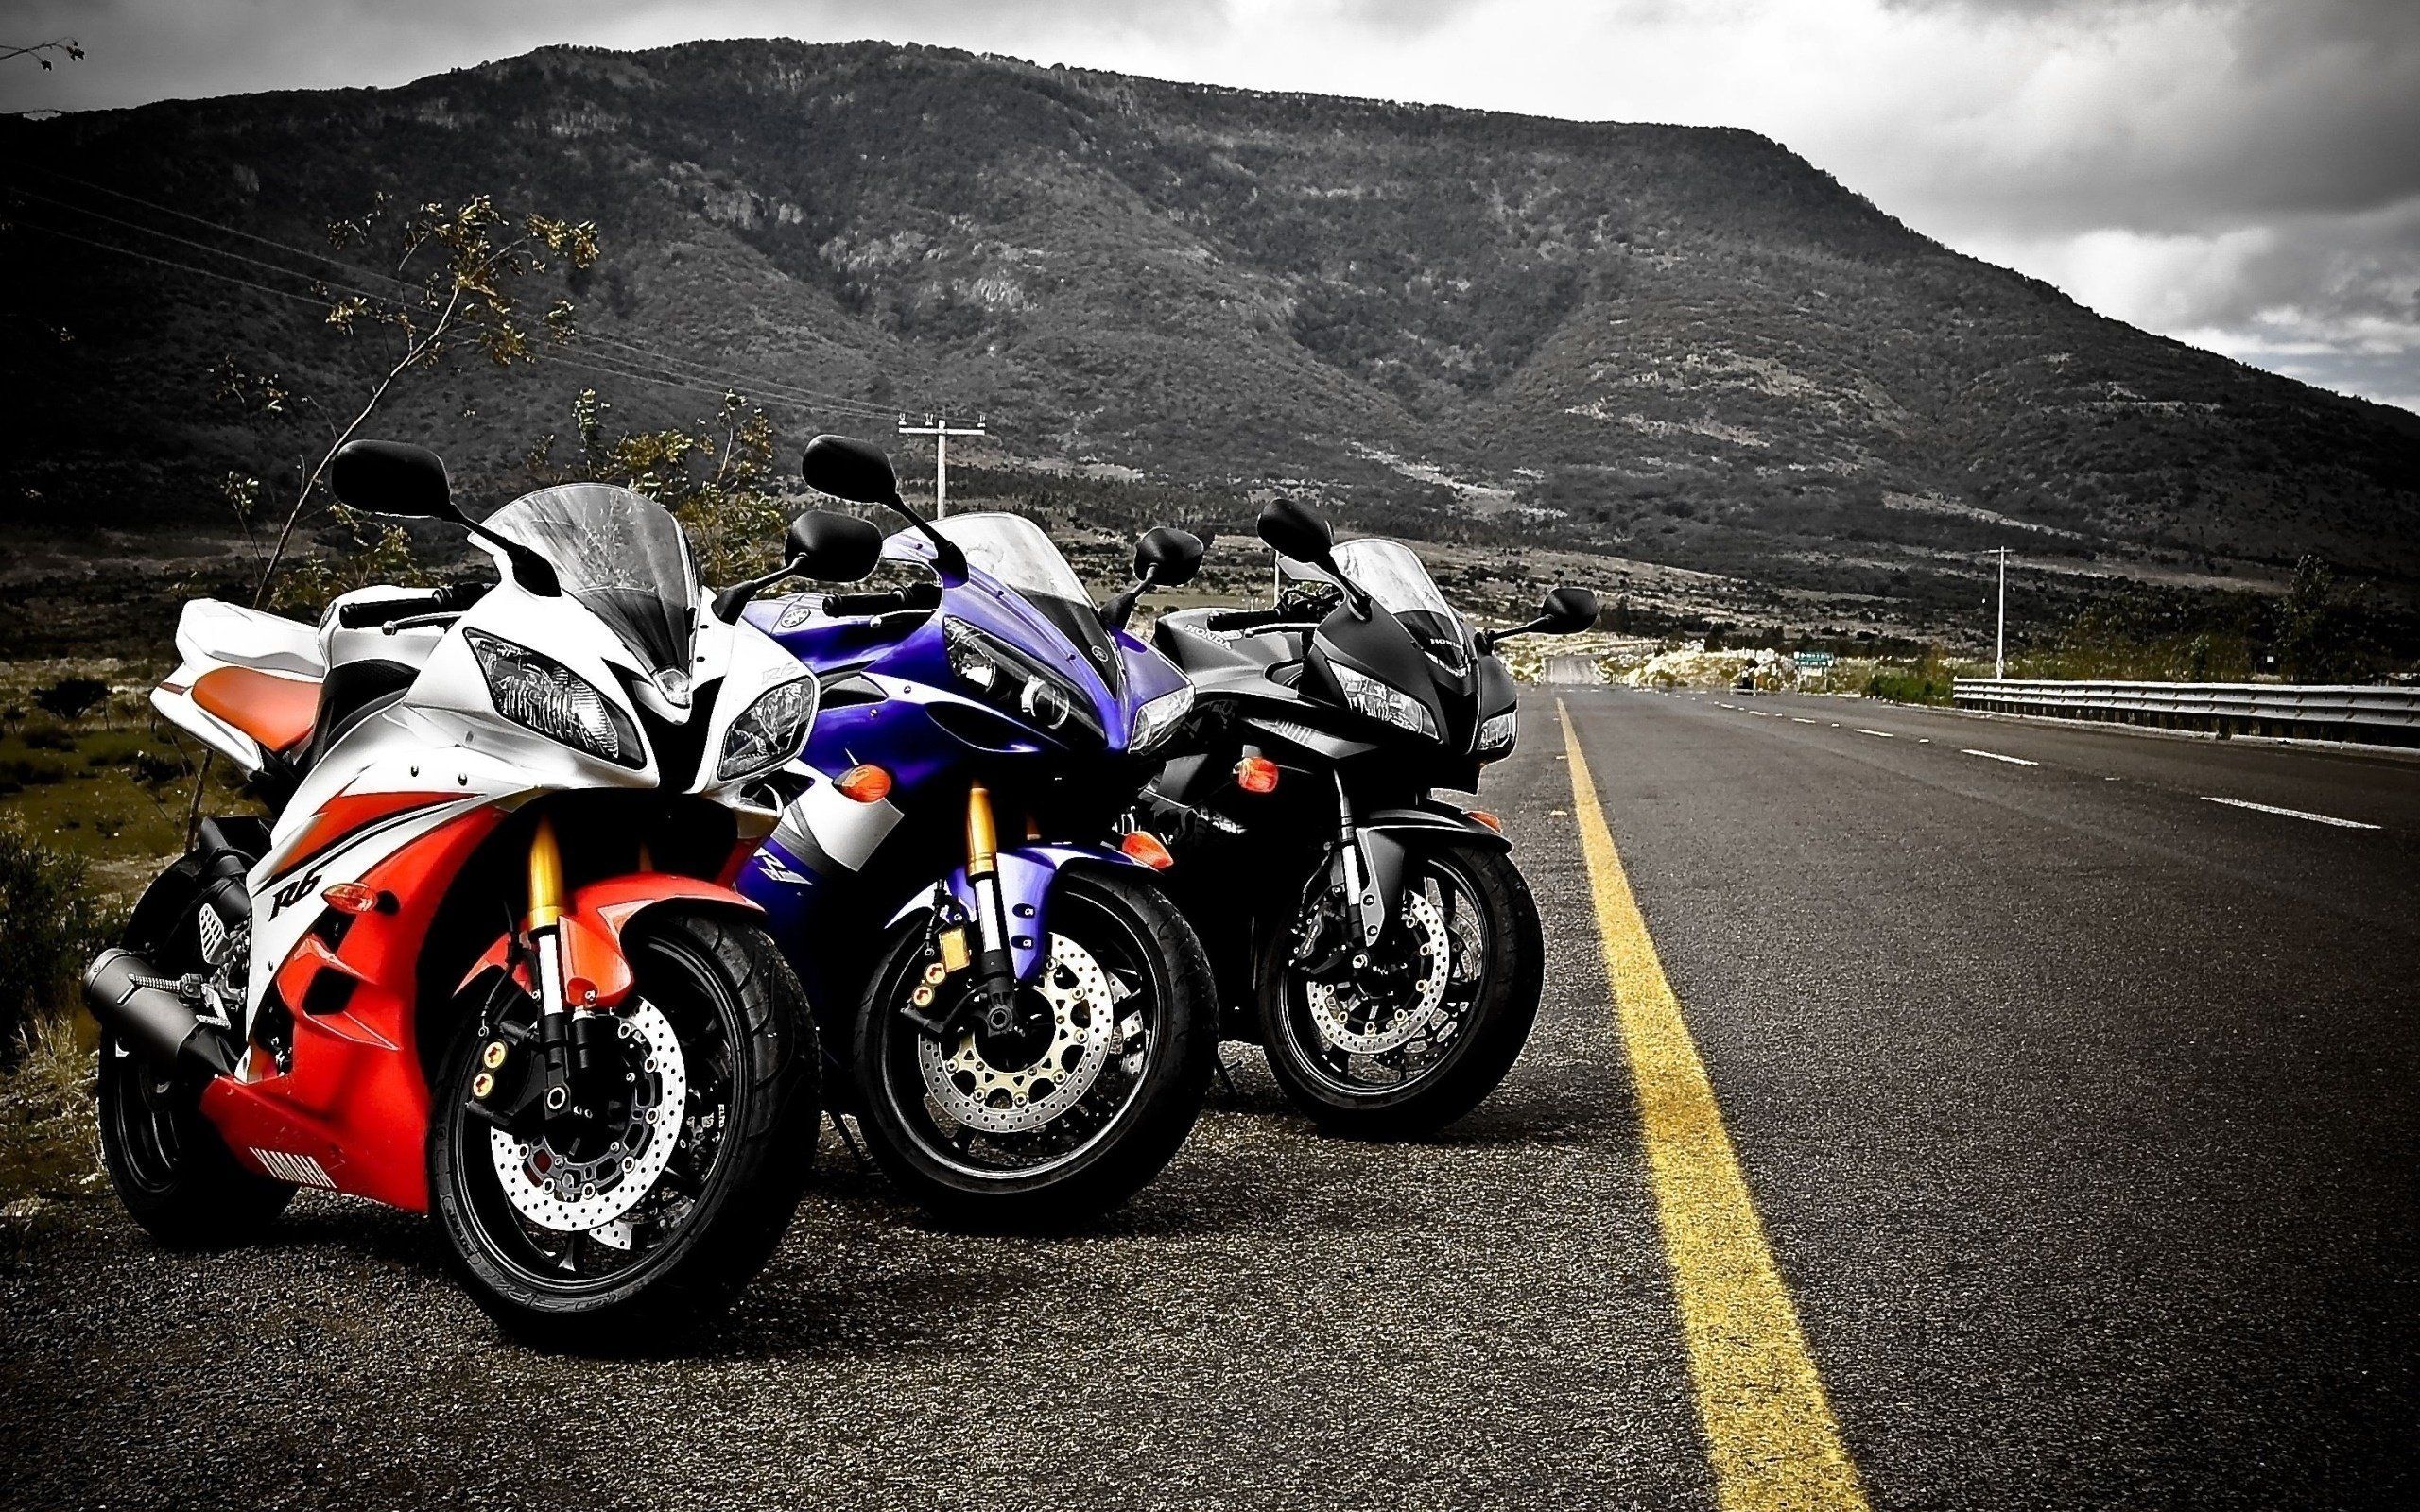 Bikers 4K wallpaper for your desktop or mobile screen free and easy to download